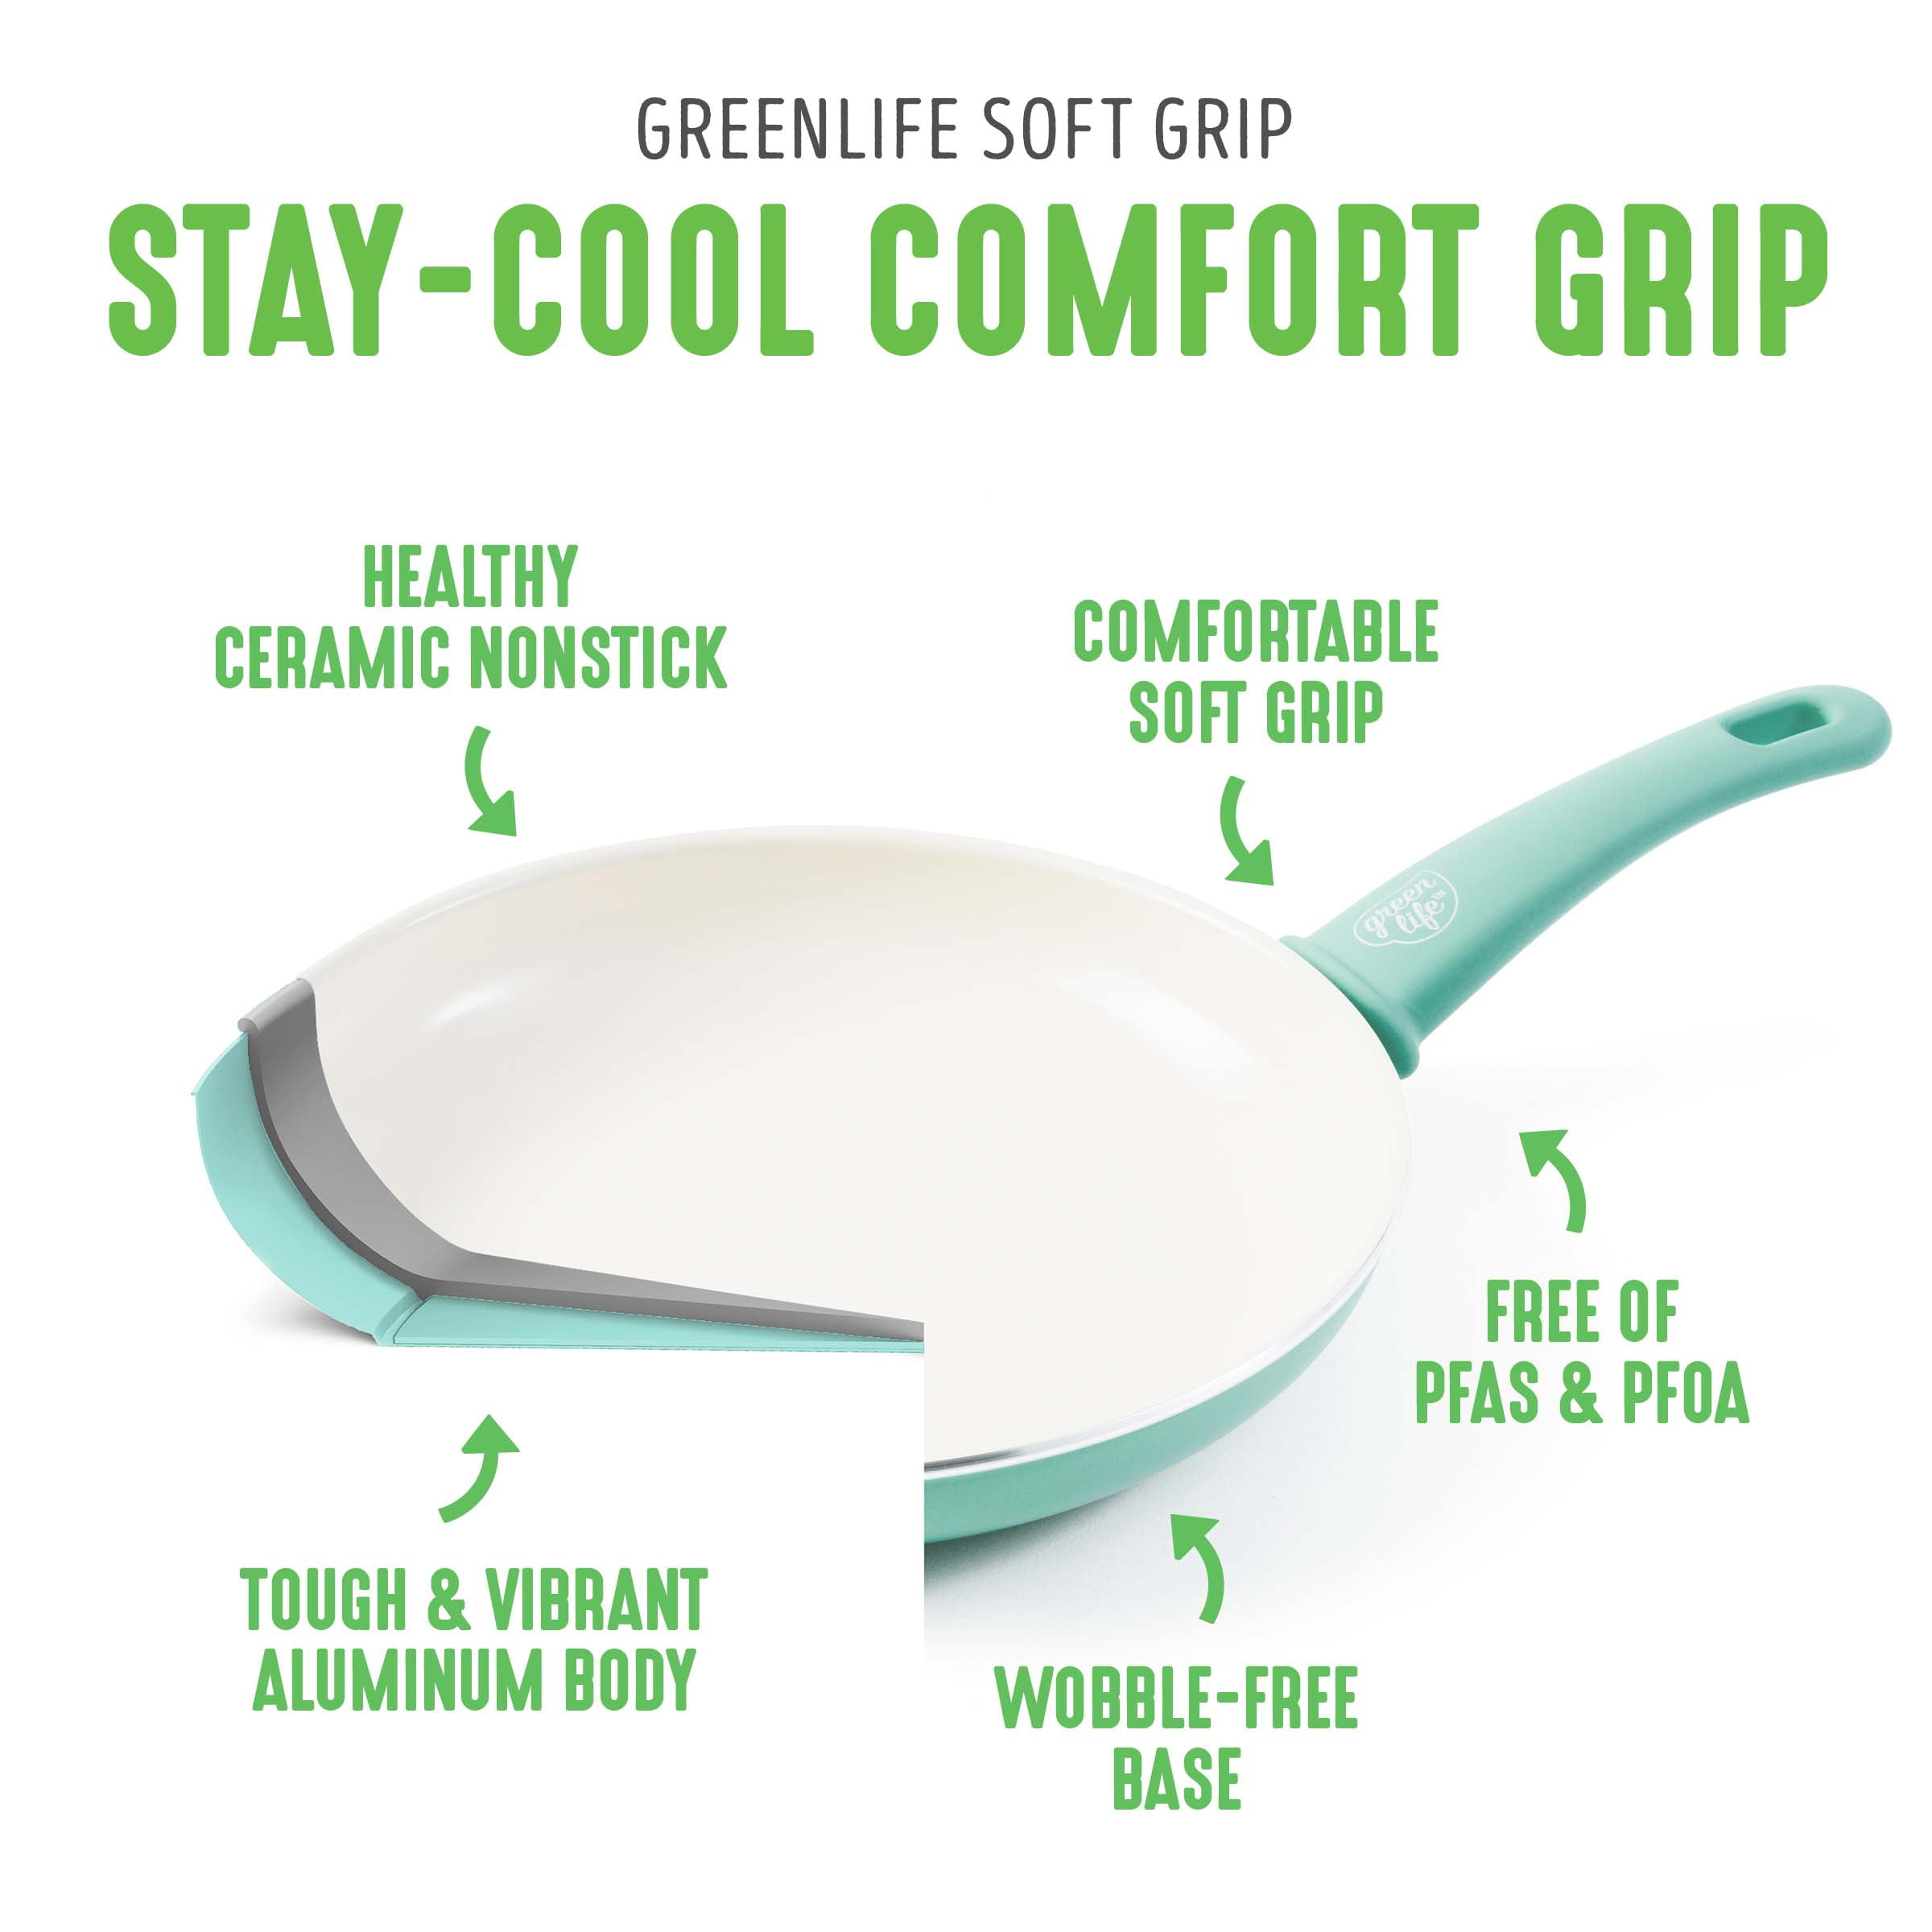 GreenLife  Stainless Pro 8 and 11-Inch Frypan Set